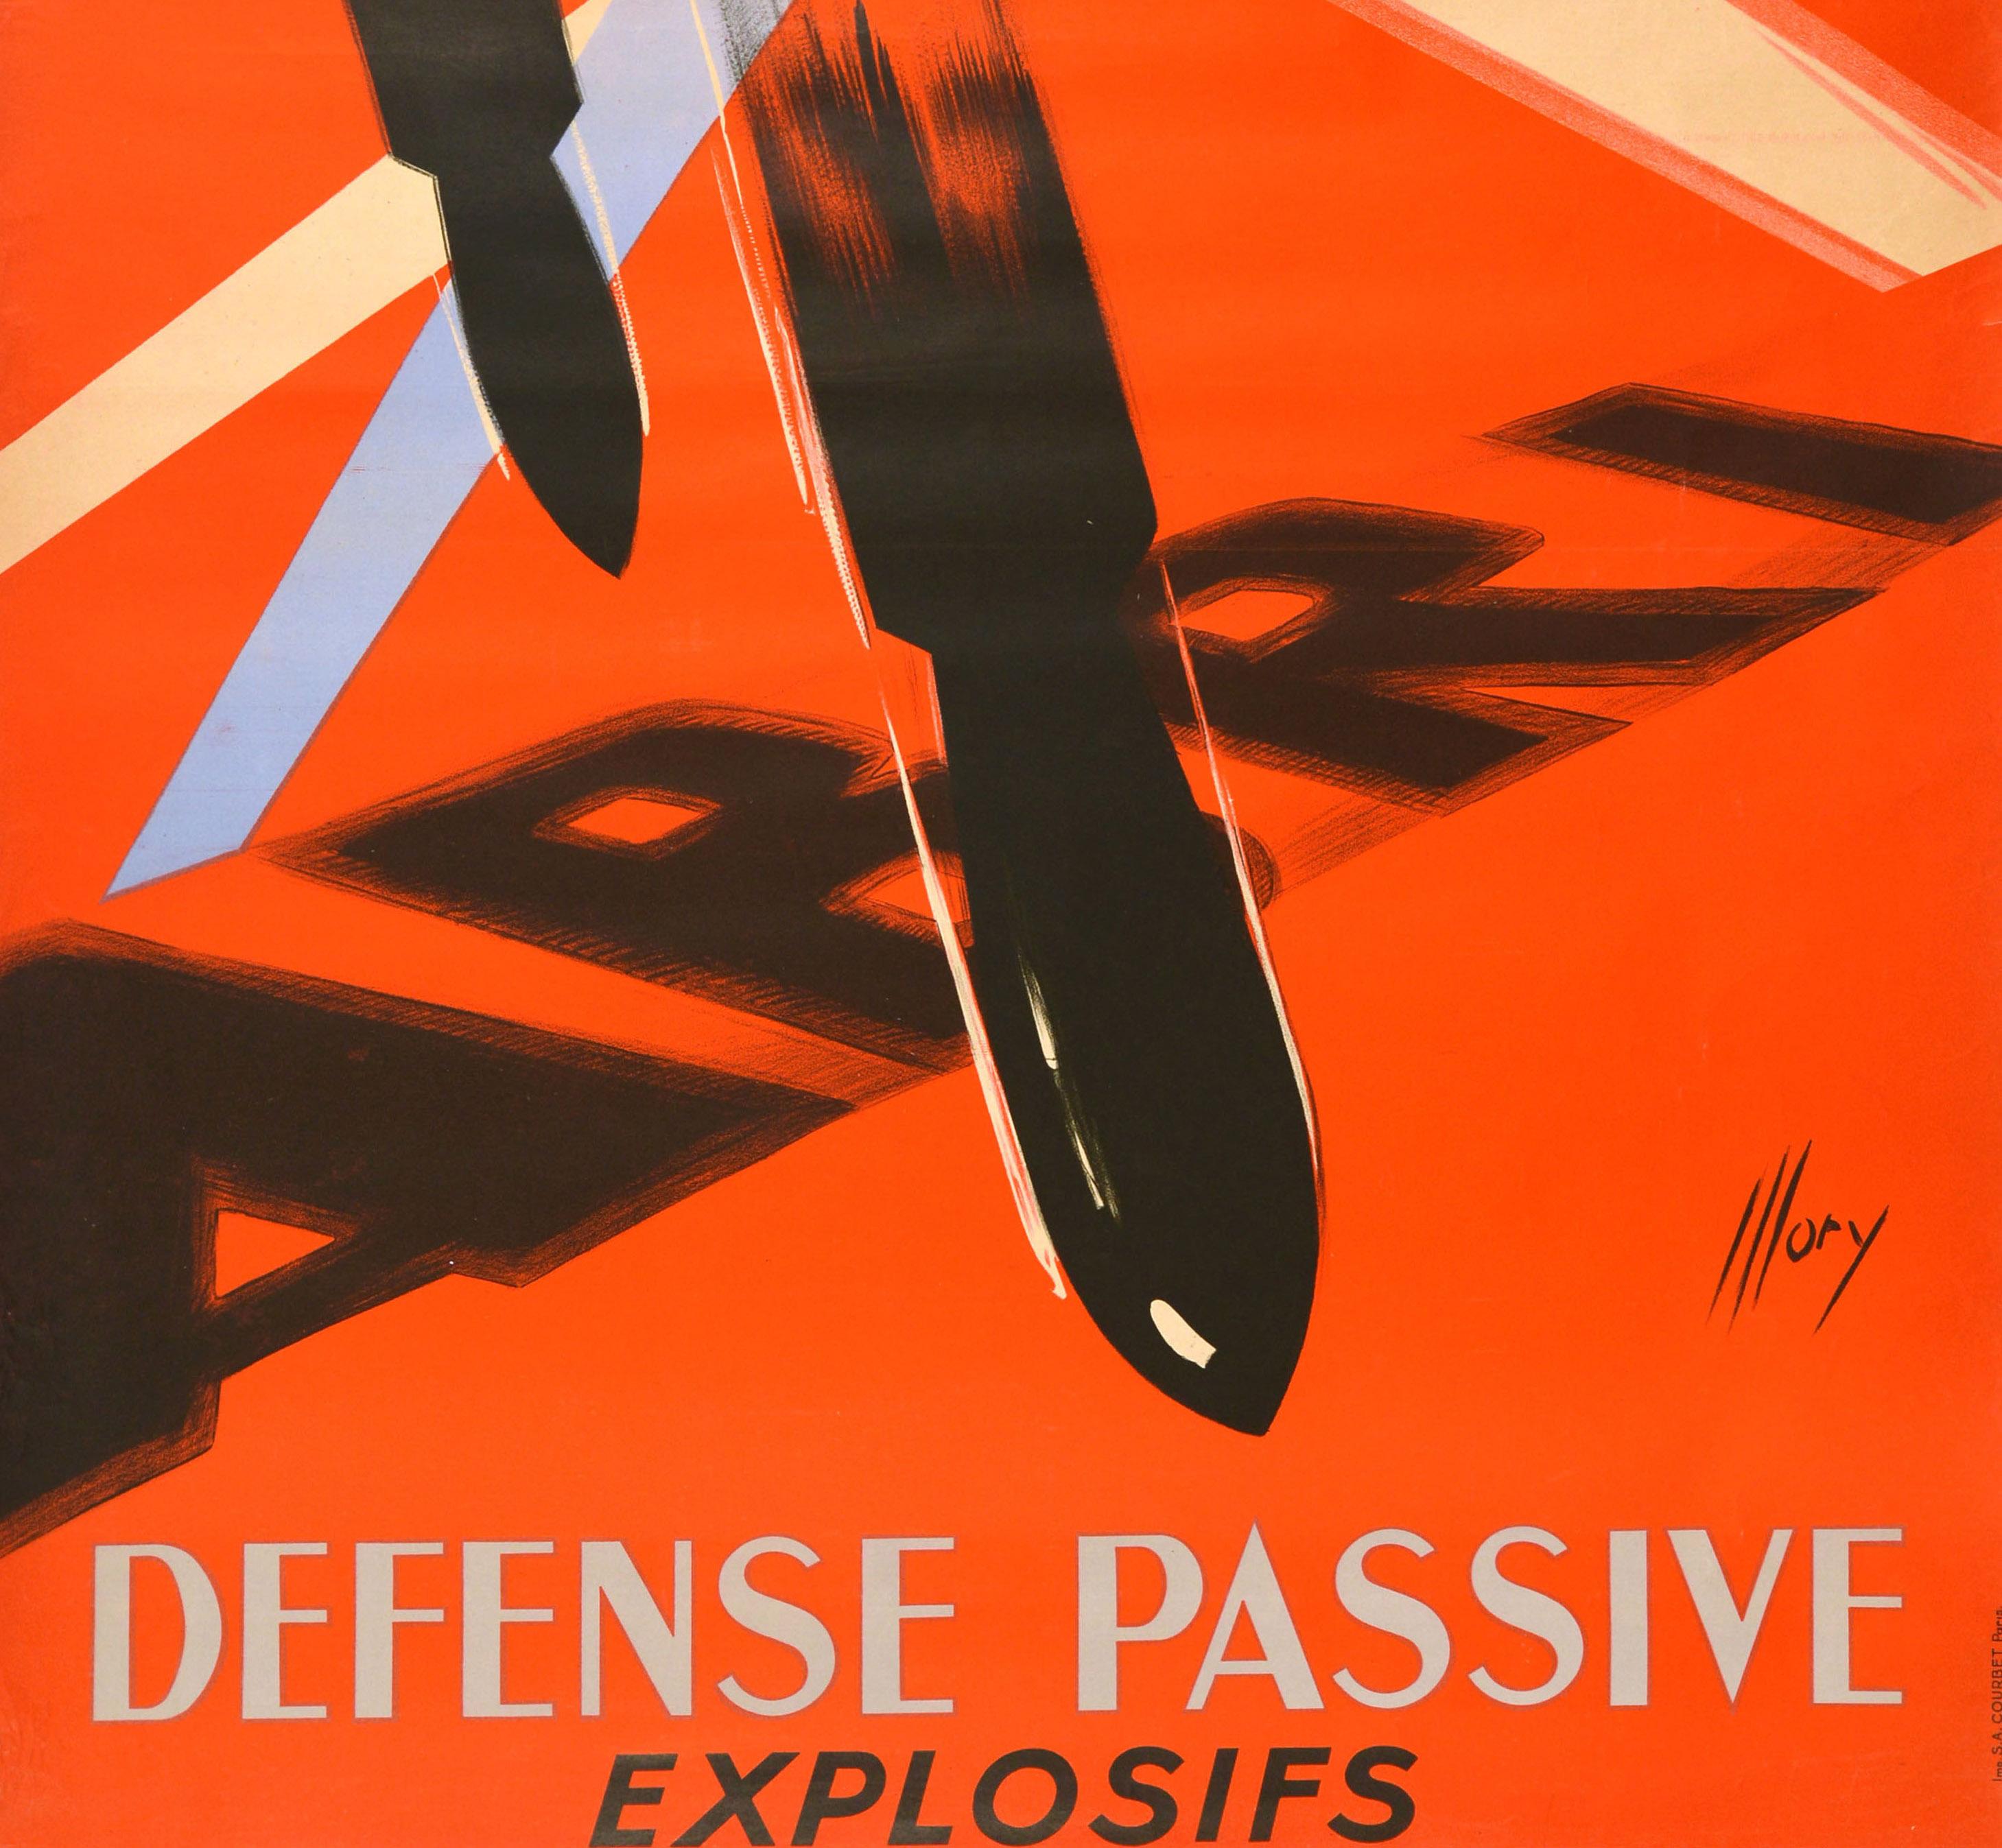 Original Vintage World War Two Poster Passive Defence WWII Shelter Bombs France - Print by Unknown